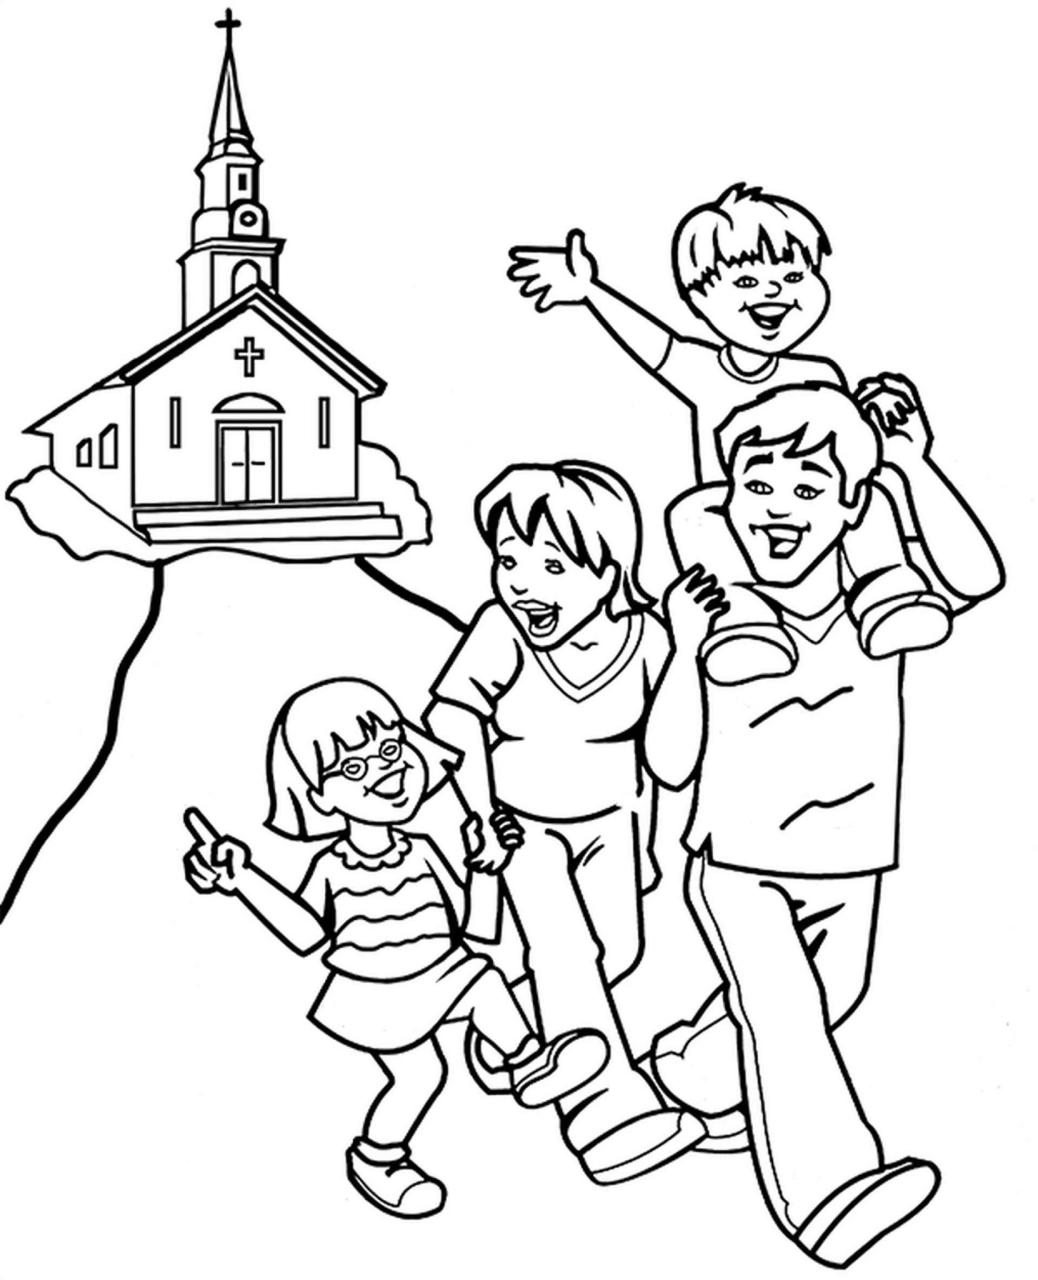 Happy Family Going Home From Church Coloring Page to Print and Download